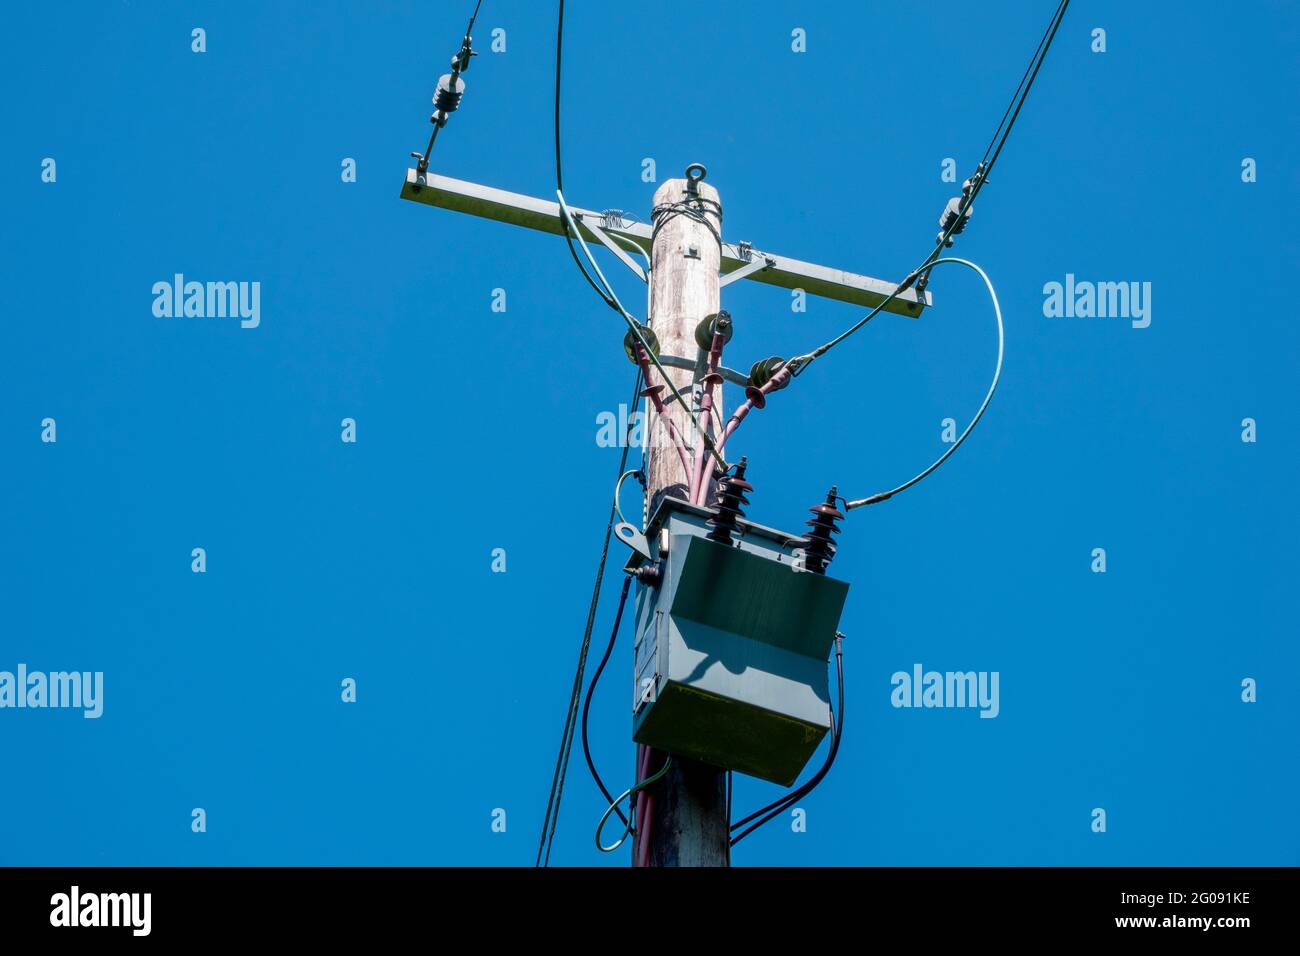 Transformer switch gear on top of a wooden pole carrying power against a blue sky Stock Photo